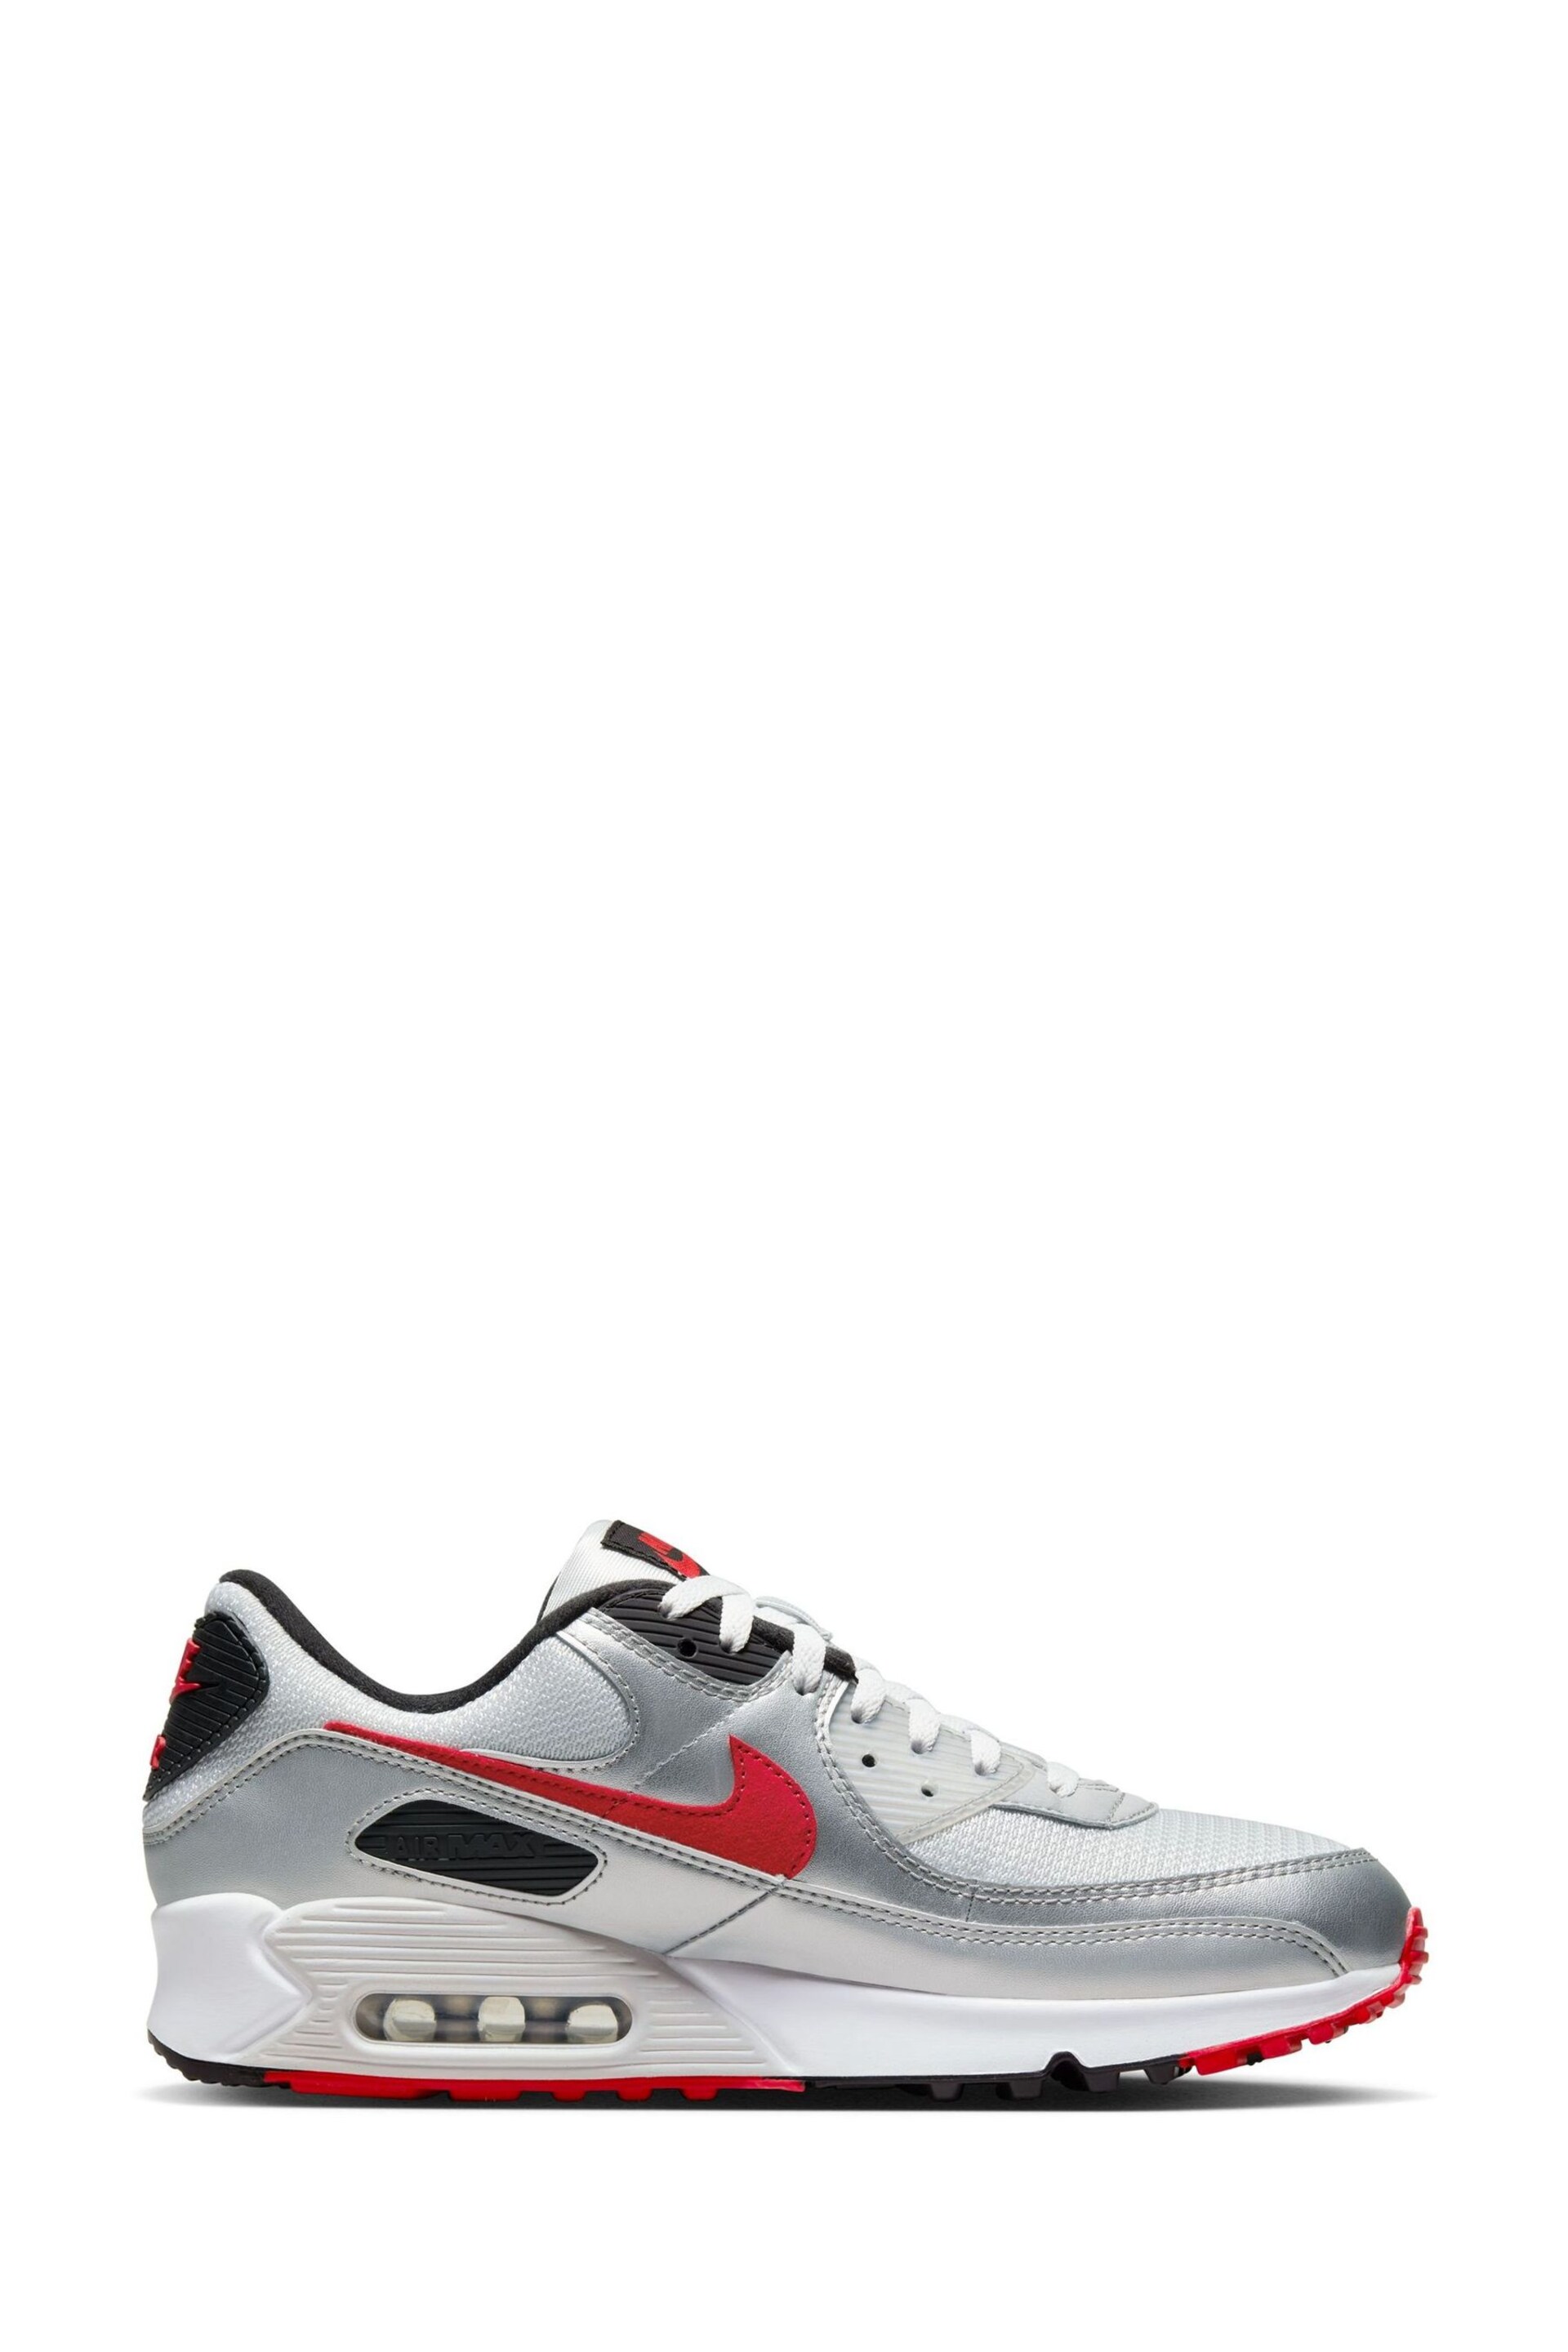 Nike Grey/Red Air Max 90 Trainers - Image 3 of 9